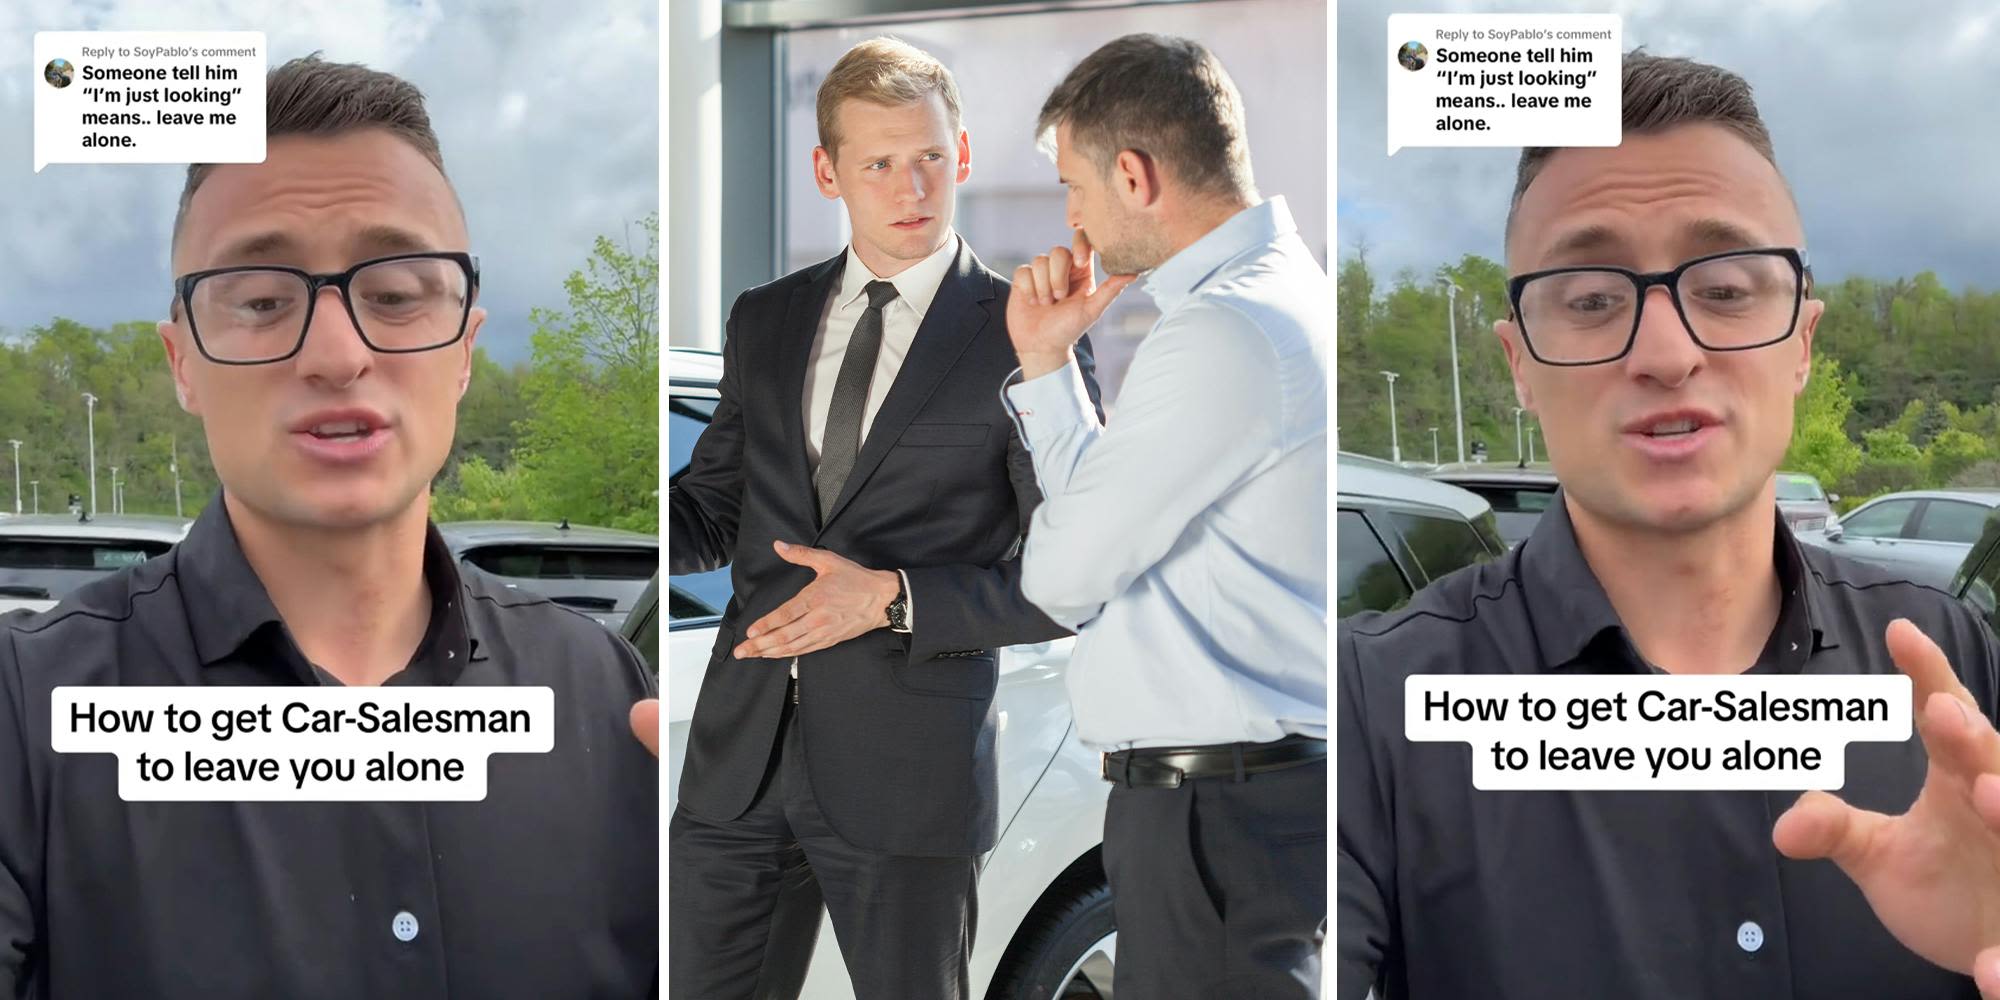 'It's not going to get us to go away': Car salesman shares how to get salespeople to leave you alone—and it's not by saying 'I'm just looking'